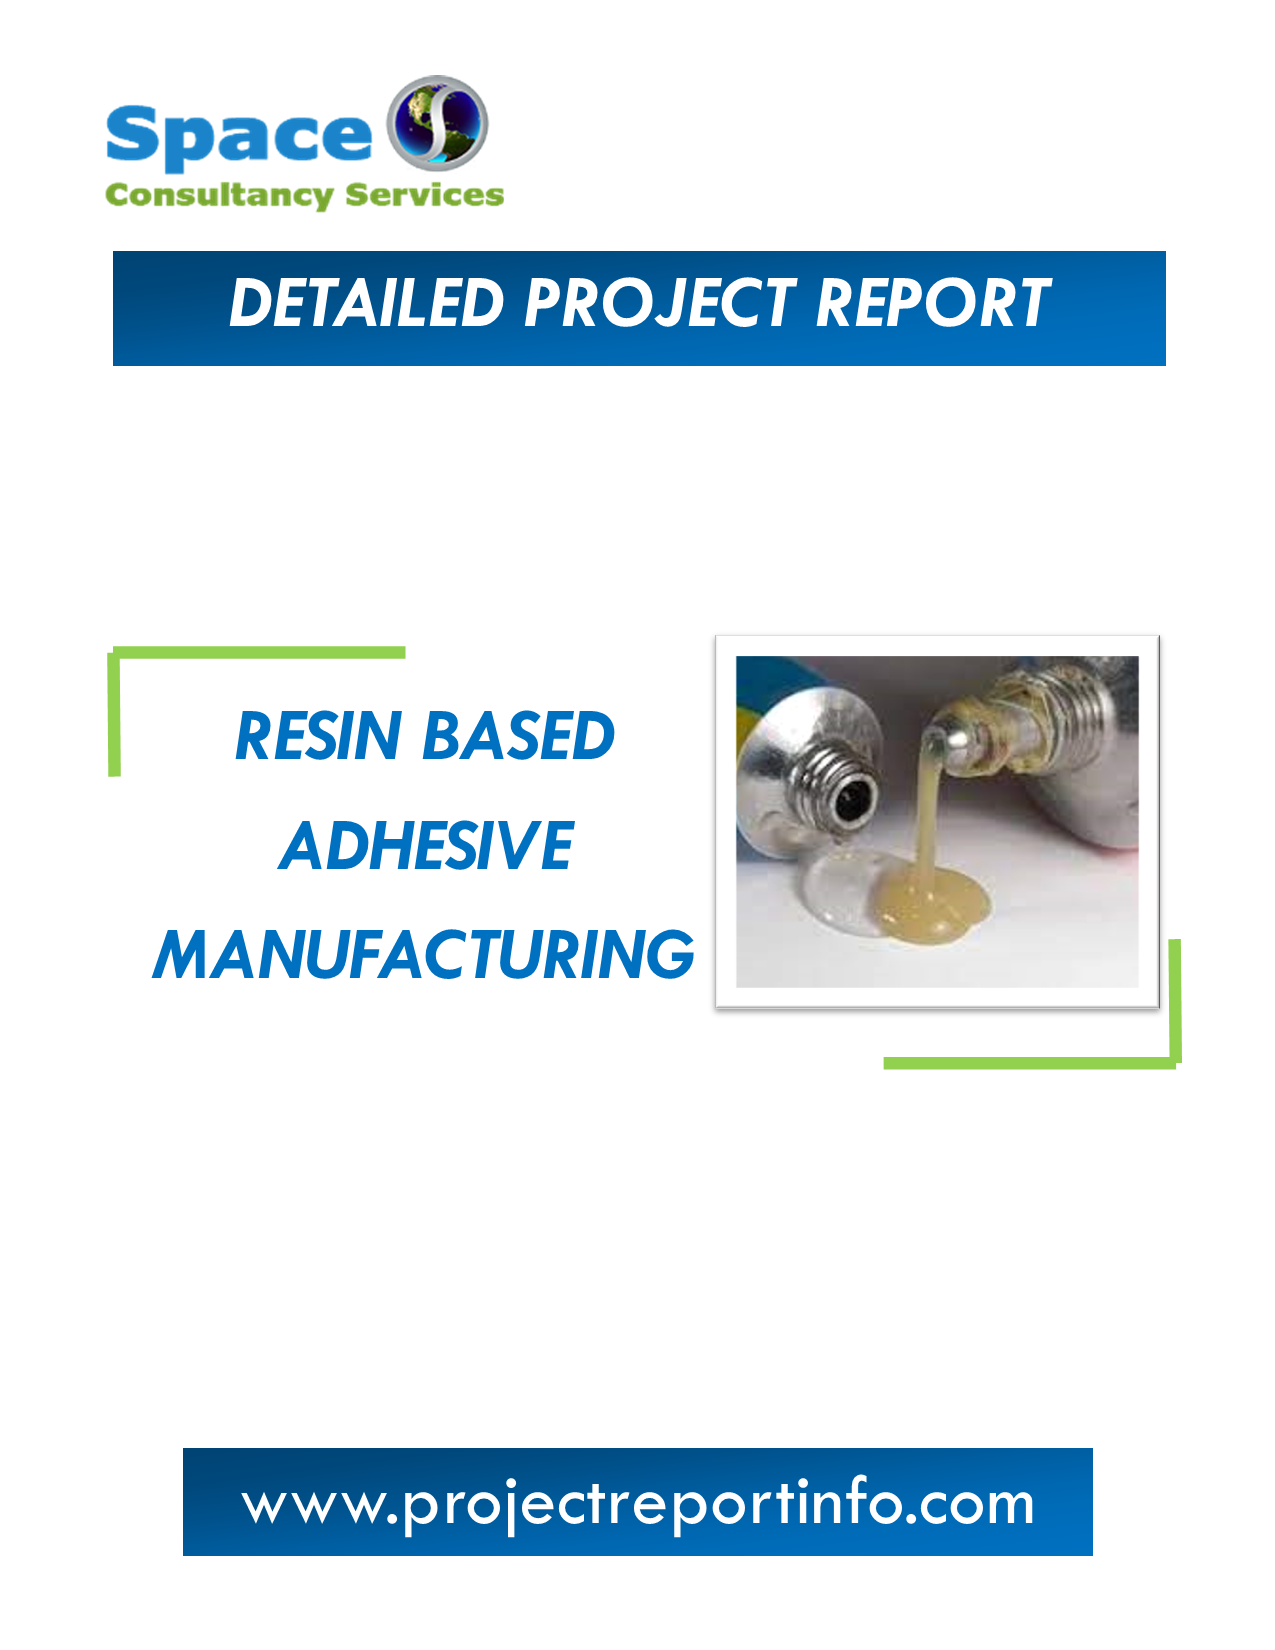 Project Report on Resin Based Adhesive Manufacturing